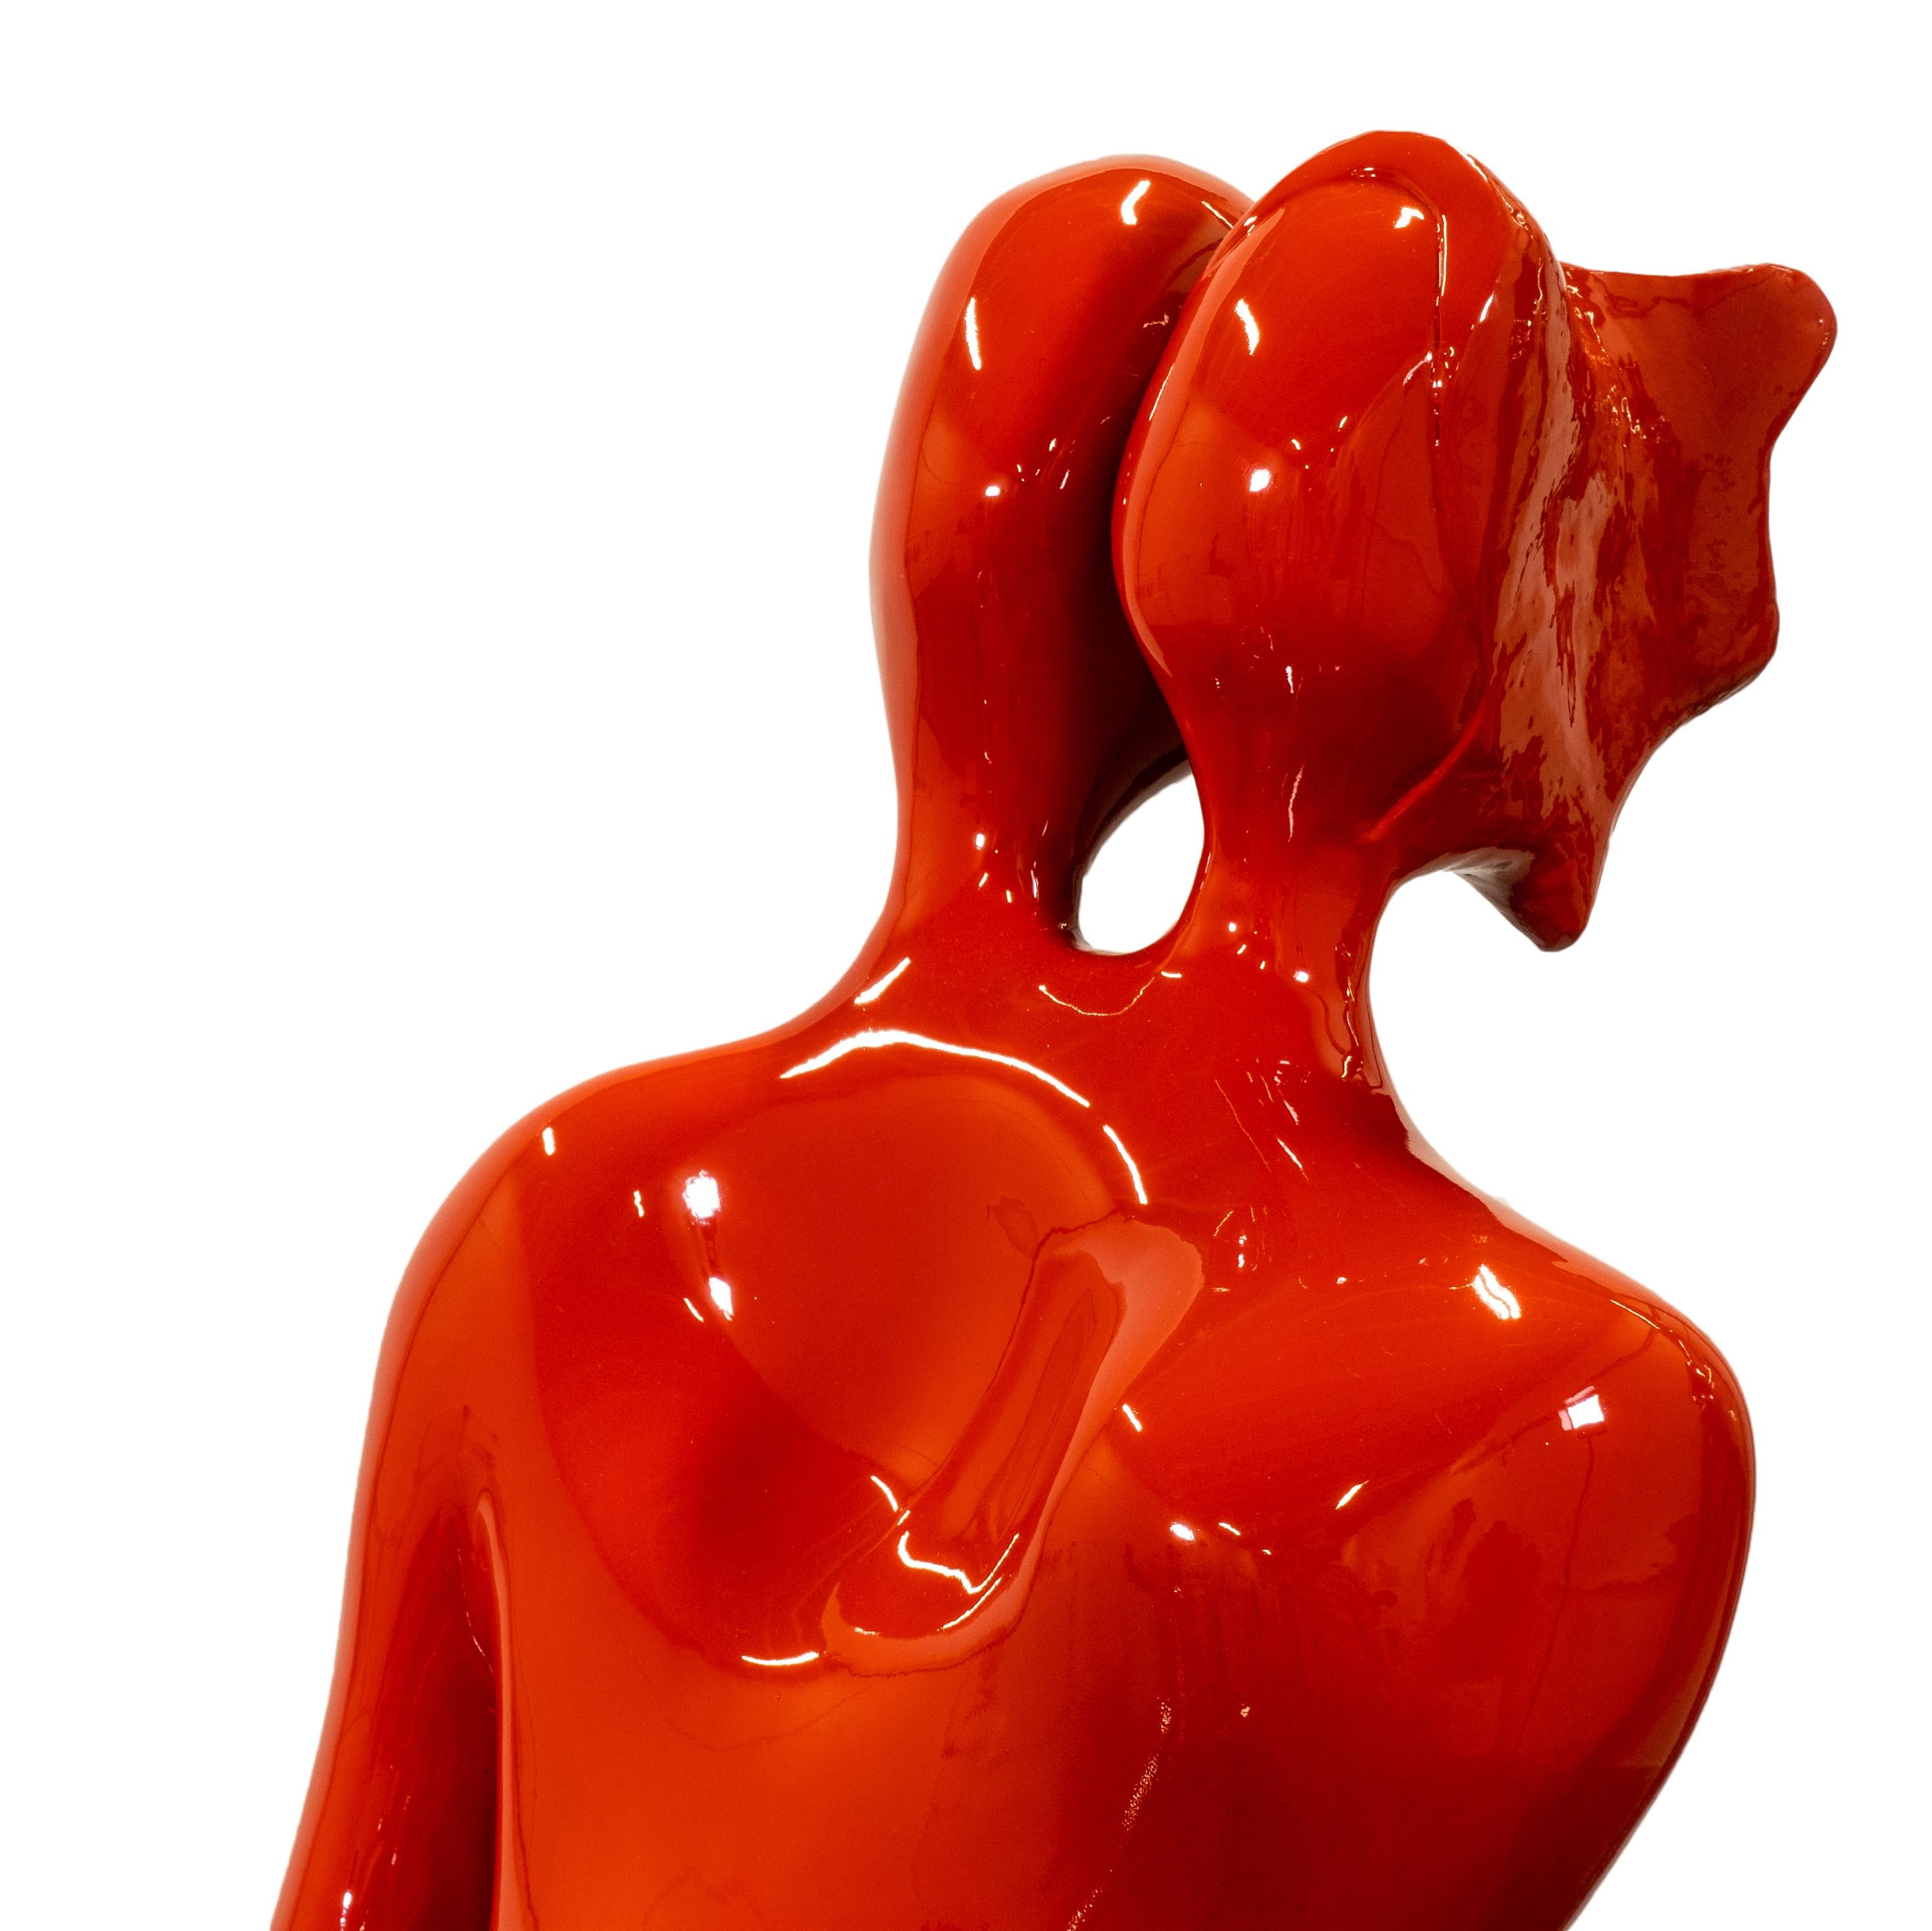 Beatriz Gerenstein exhibited “Soulmates II” in the museum “La Quadreria, in Bologna, Italy, in 2020.
The artist plays with the deep mysteries of love. This sculpture shows two human figures fused into one body. 
The bright, shiny red patina clearly